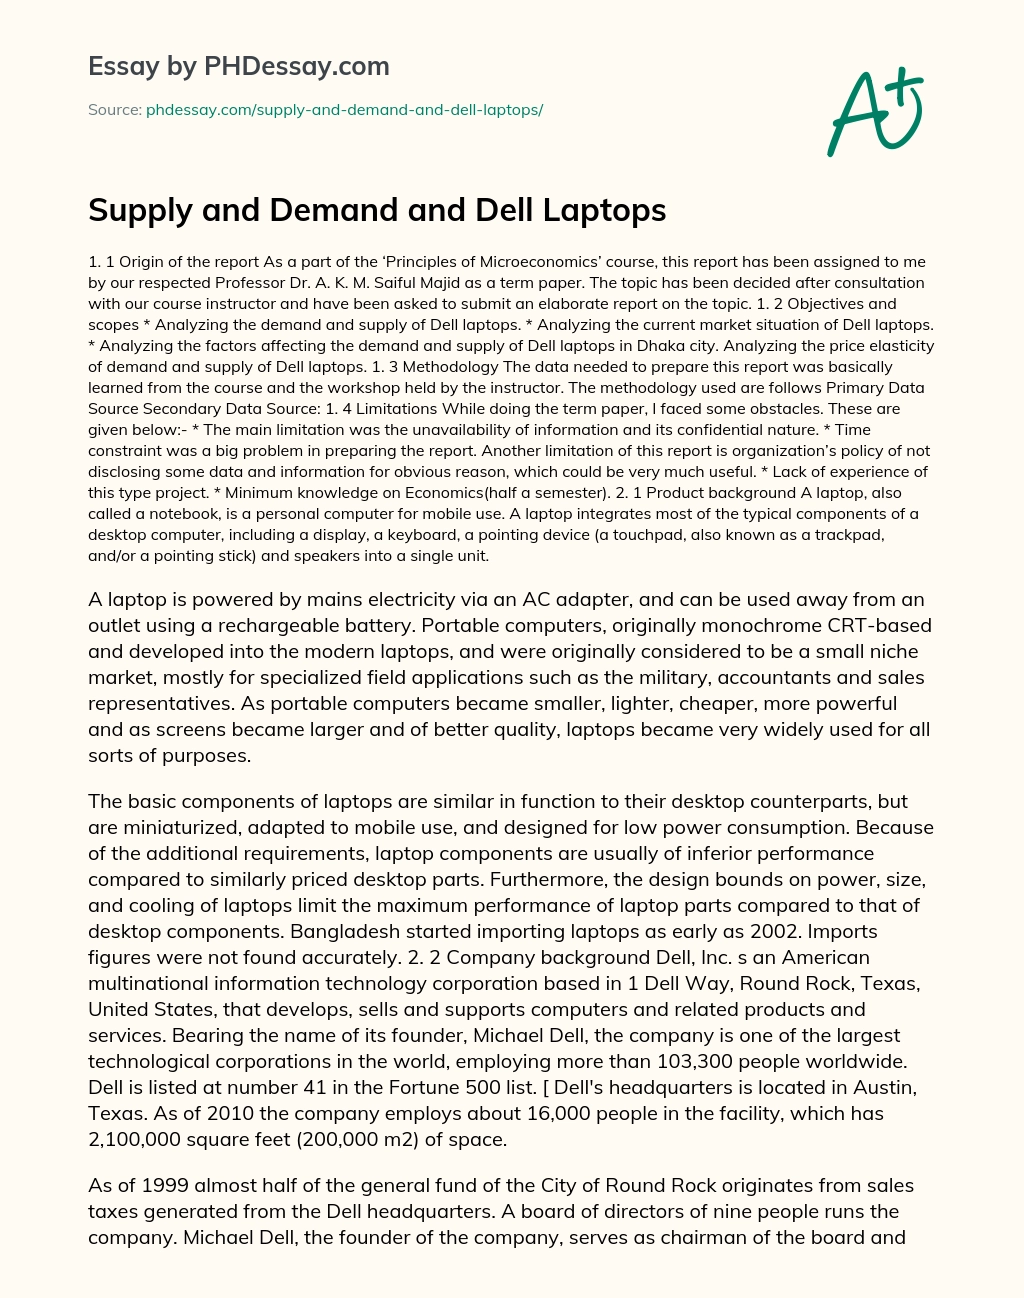 Supply and Demand and Dell Laptops essay